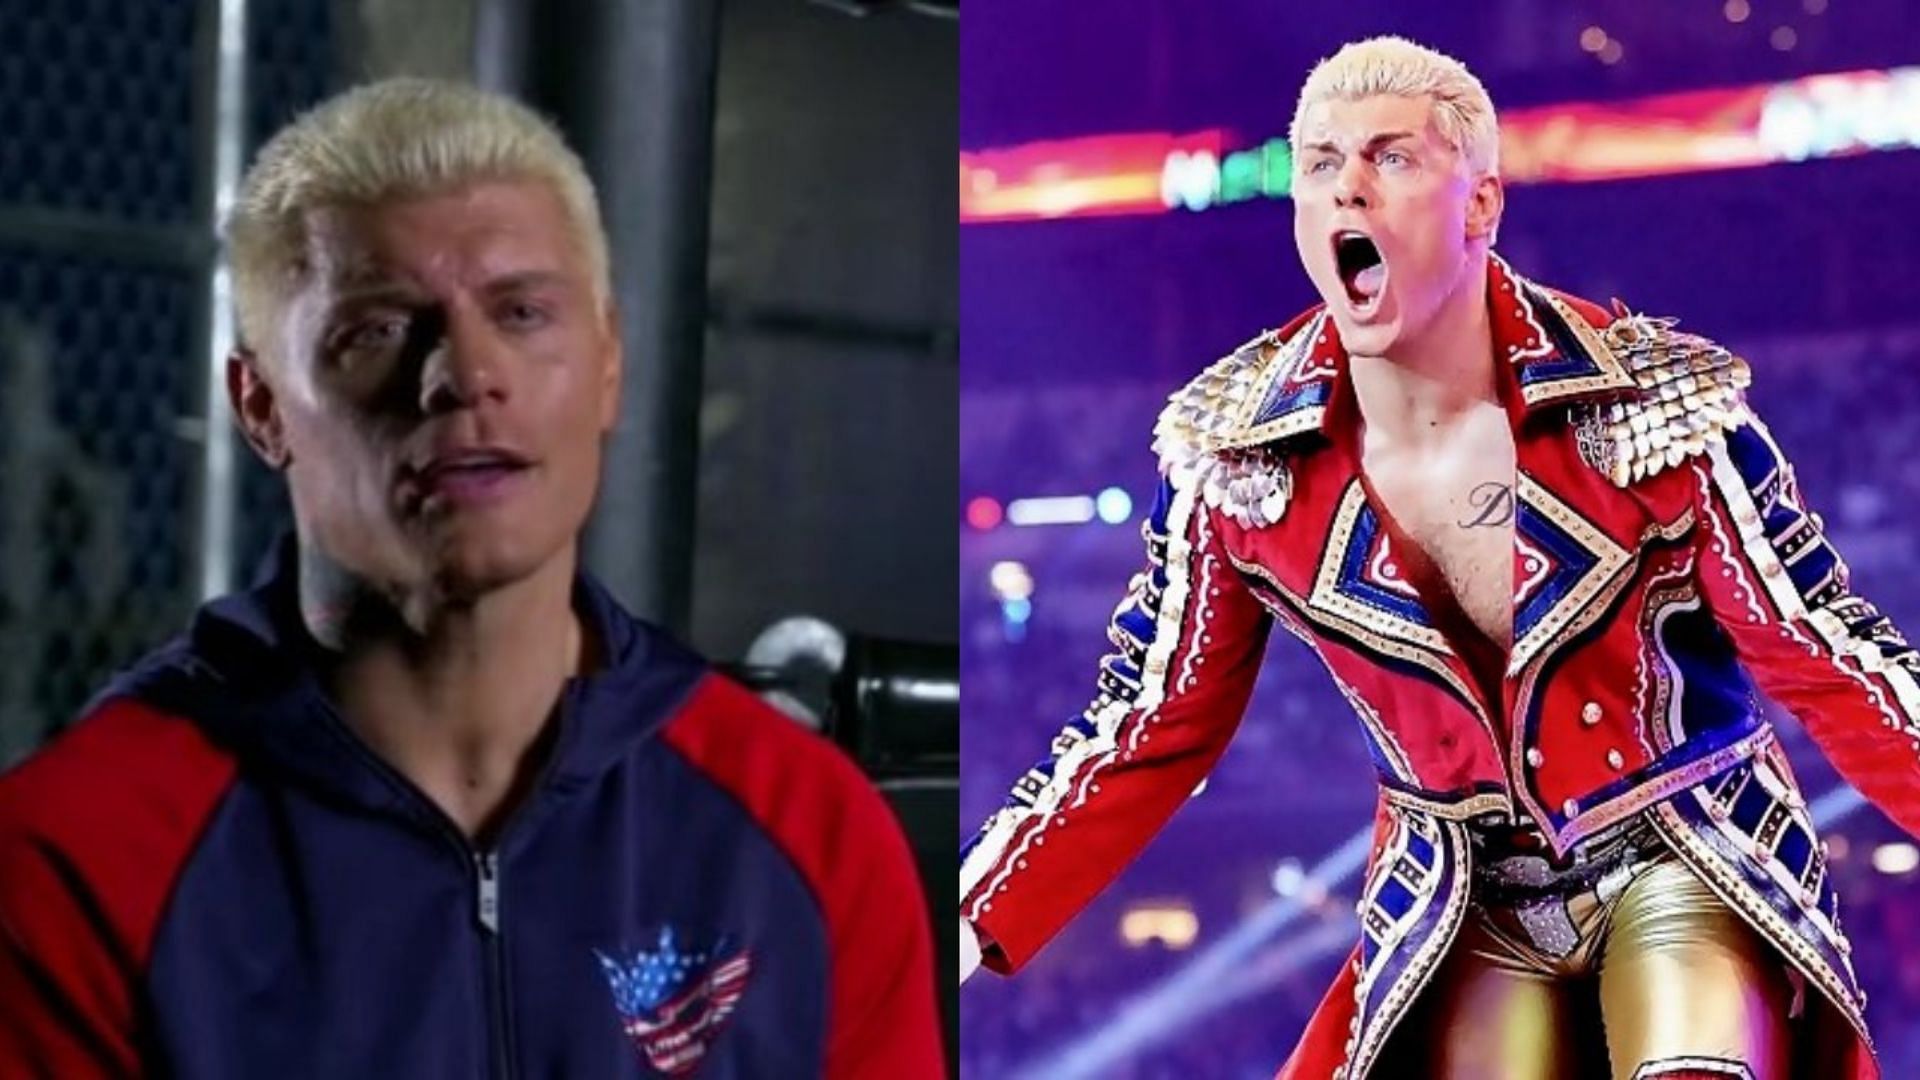 Cody Rhodes will be back at the Royal Rumble